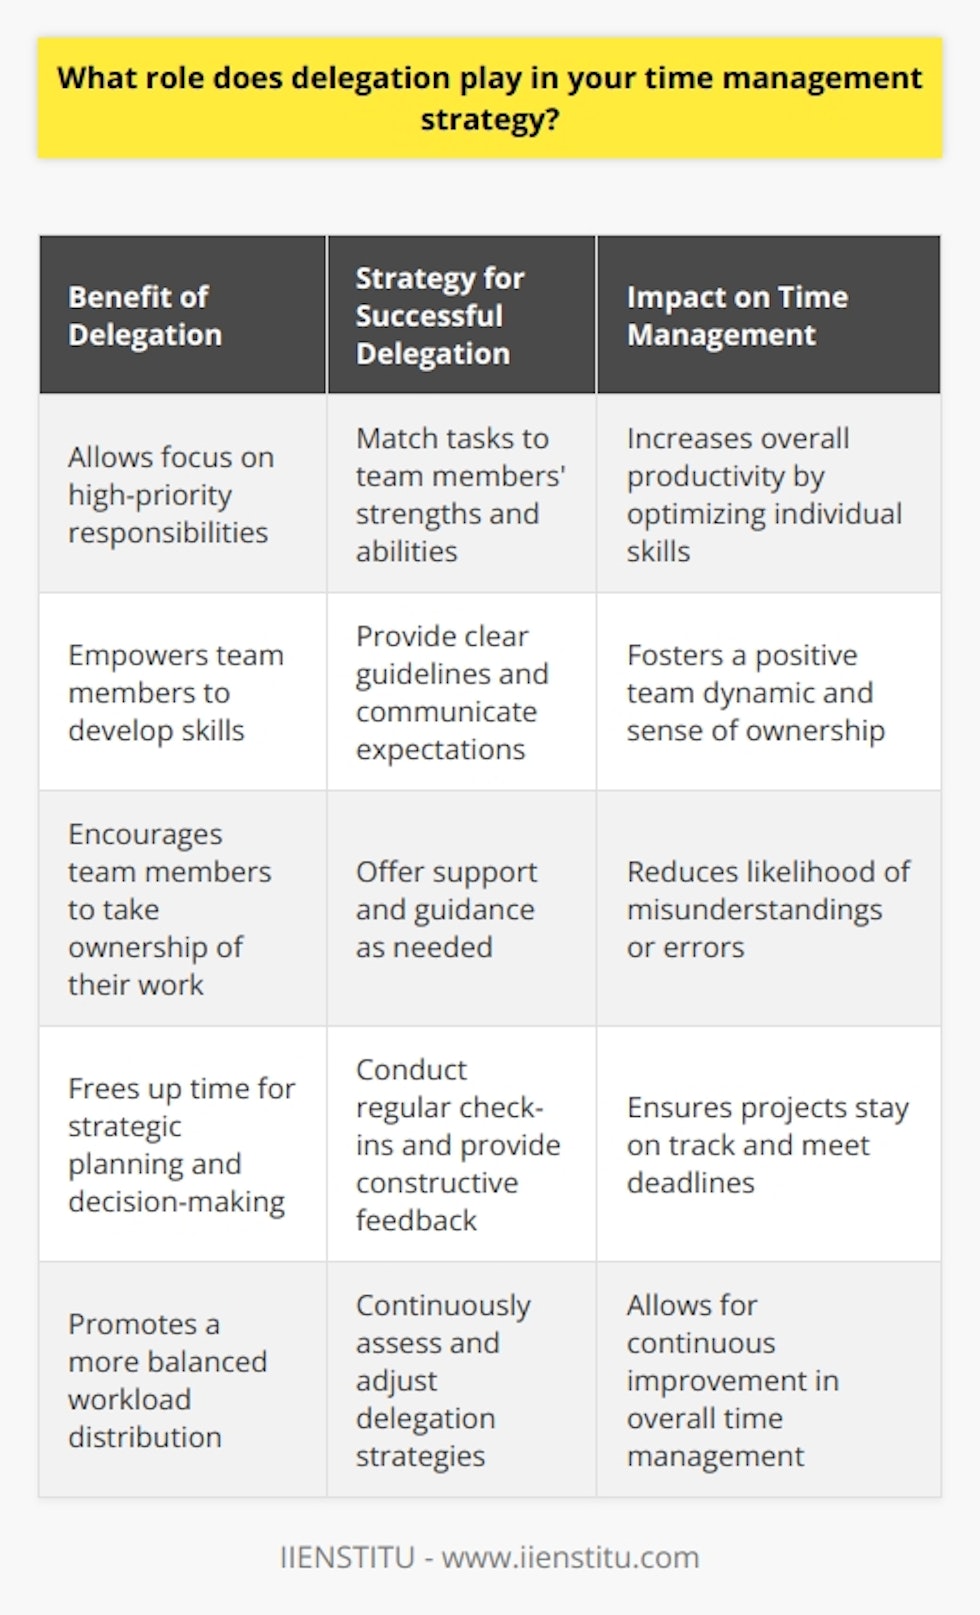 Delegation is a critical component of my time management strategy. As a leader, I recognize that I cannot handle every task personally. Effective delegation allows me to focus on high-priority responsibilities while empowering my team members to develop their skills and take ownership of their work. Benefits of Delegation Ive learned through experience that delegation offers numerous benefits: Strategies for Successful Delegation Over the years, Ive developed a few key strategies for successful delegation: Matching Tasks to Skills I carefully consider each team members strengths and abilities when assigning tasks. This ensures that the right person is handling the right job, leading to better results and increased efficiency. Providing Clear Instructions and Expectations When delegating a task, I provide clear guidelines and communicate my expectations. This helps team members understand their responsibilities and reduces the likelihood of misunderstandings or errors. Offering Support and Feedback I make myself available to answer questions and provide guidance as needed. Regular check-ins and constructive feedback help keep projects on track and ensure that team members feel supported. By incorporating delegation into my time management strategy, Im able to accomplish more, foster a positive team dynamic, and continuously improve our overall productivity.